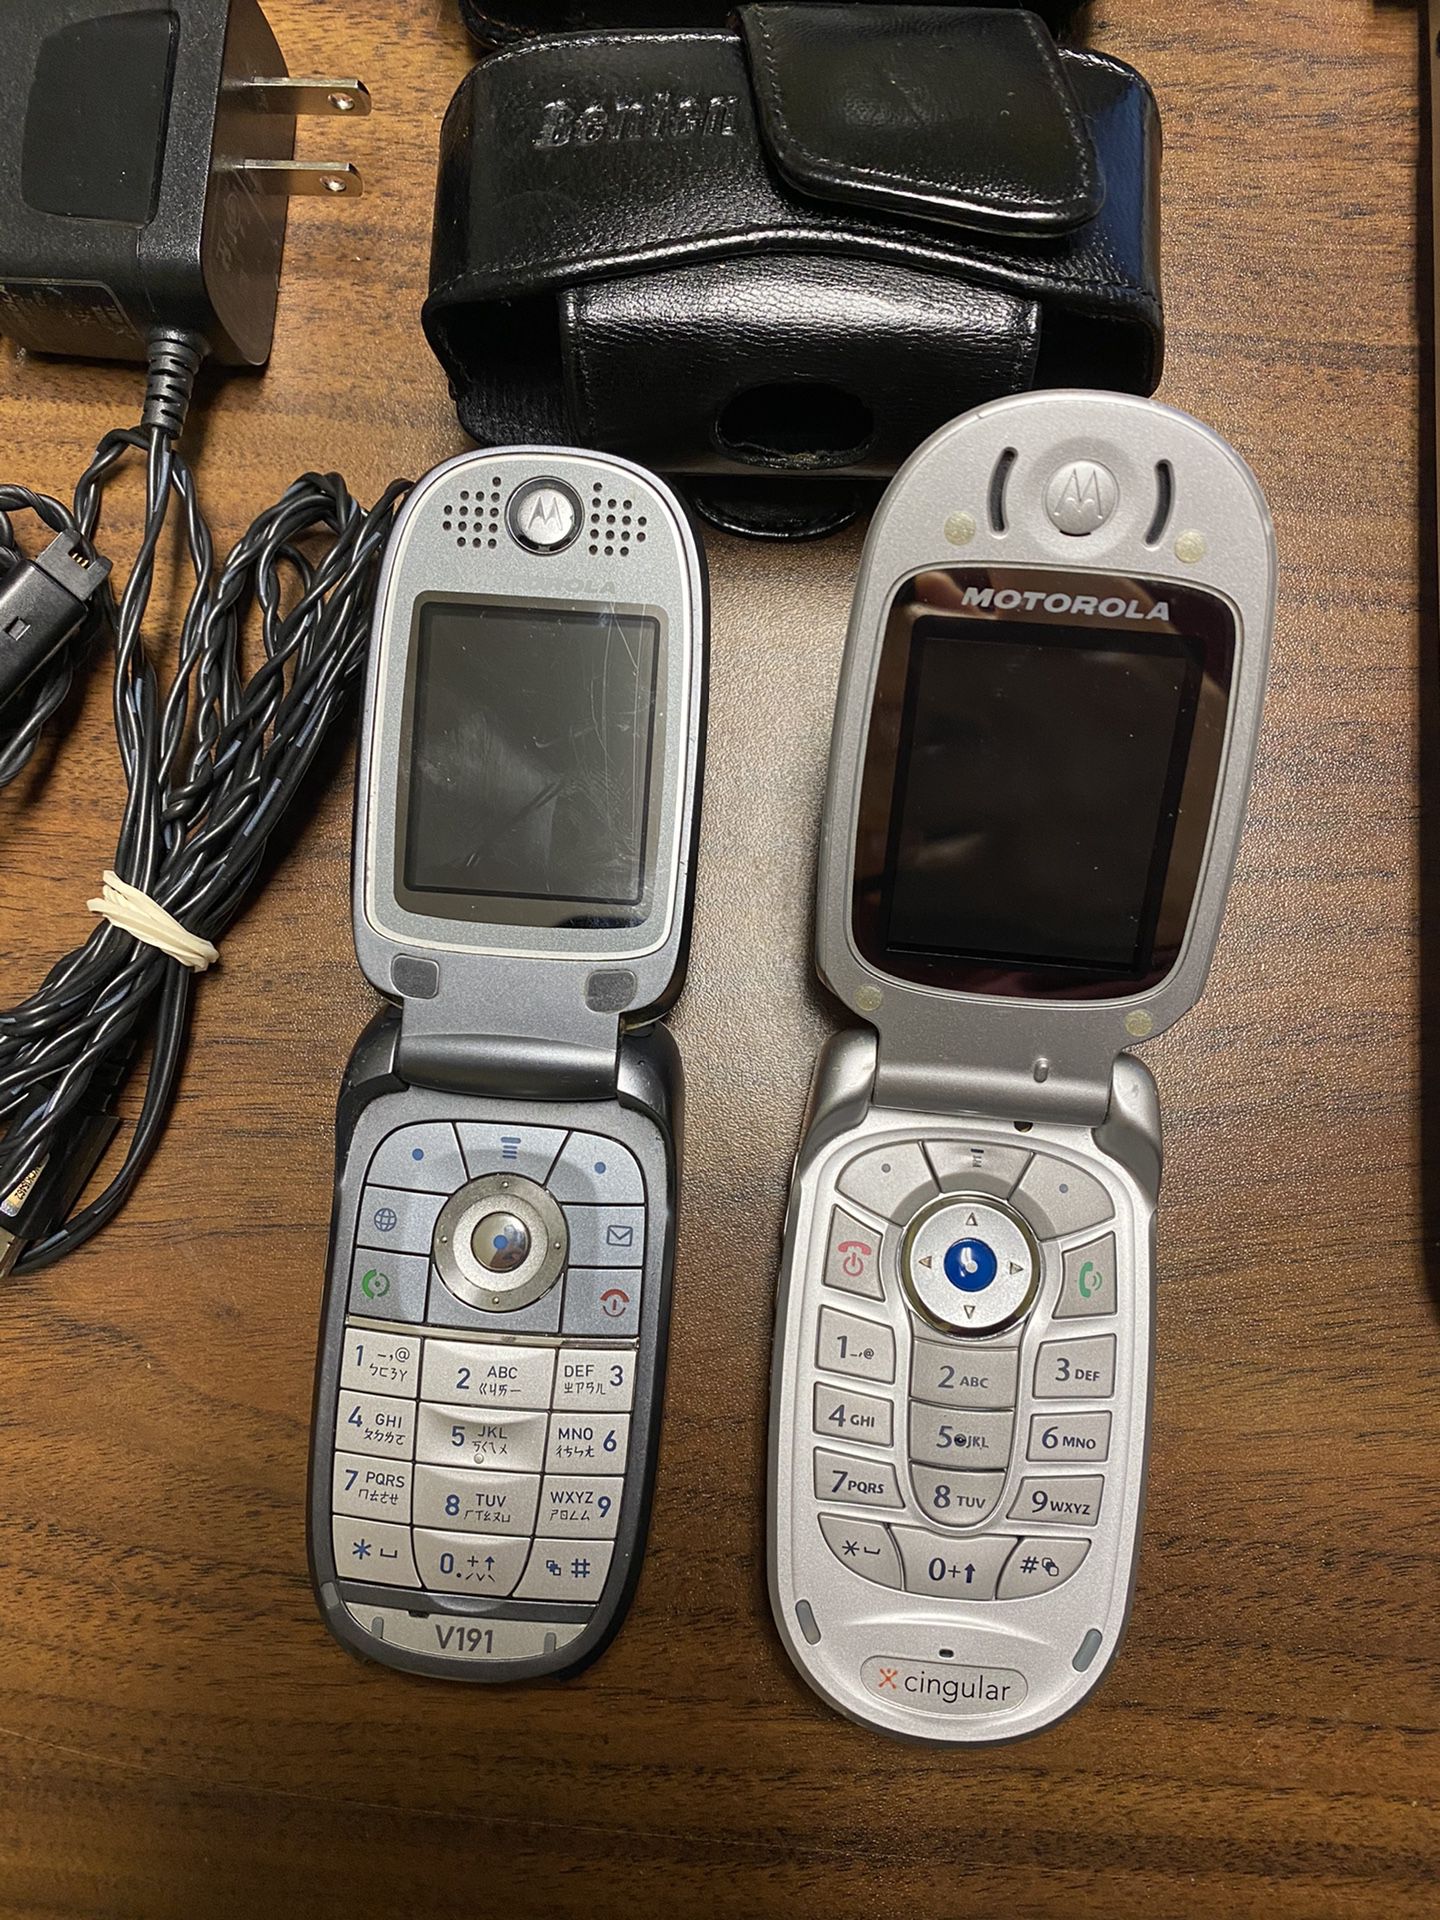 Working Motorola Flip Phones V191, Cingular with Chargers, Pouches